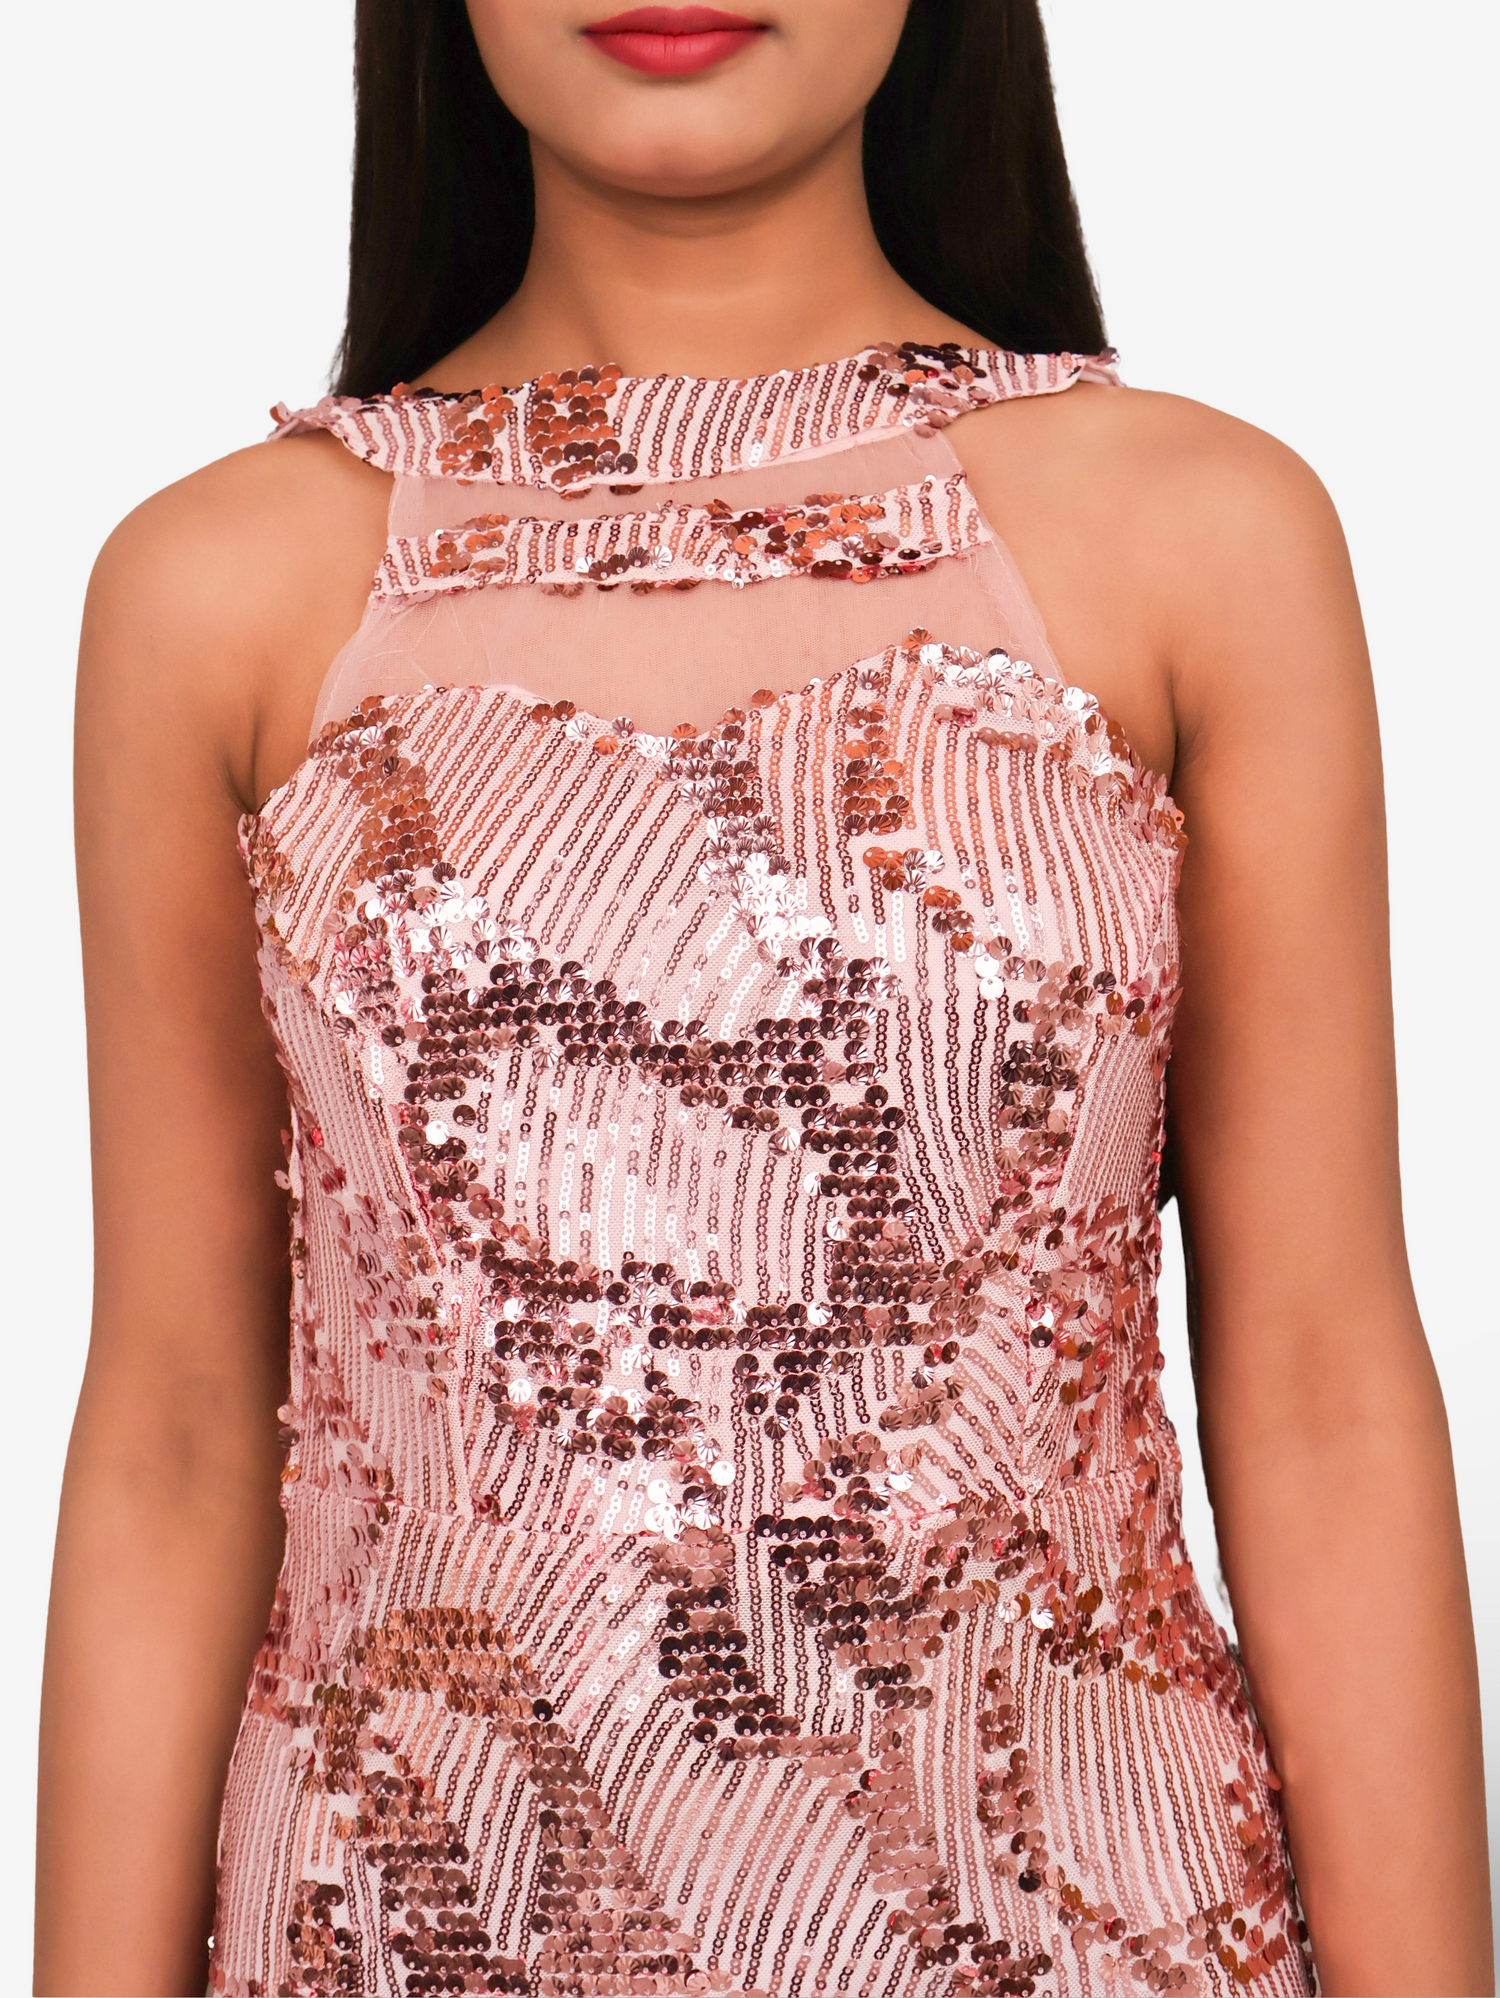 Sparkling Sequins Round Neck Bodycon Mini Dress by Shreekama Pink Small Dress for Party Festival Wedding Occasion in Noida